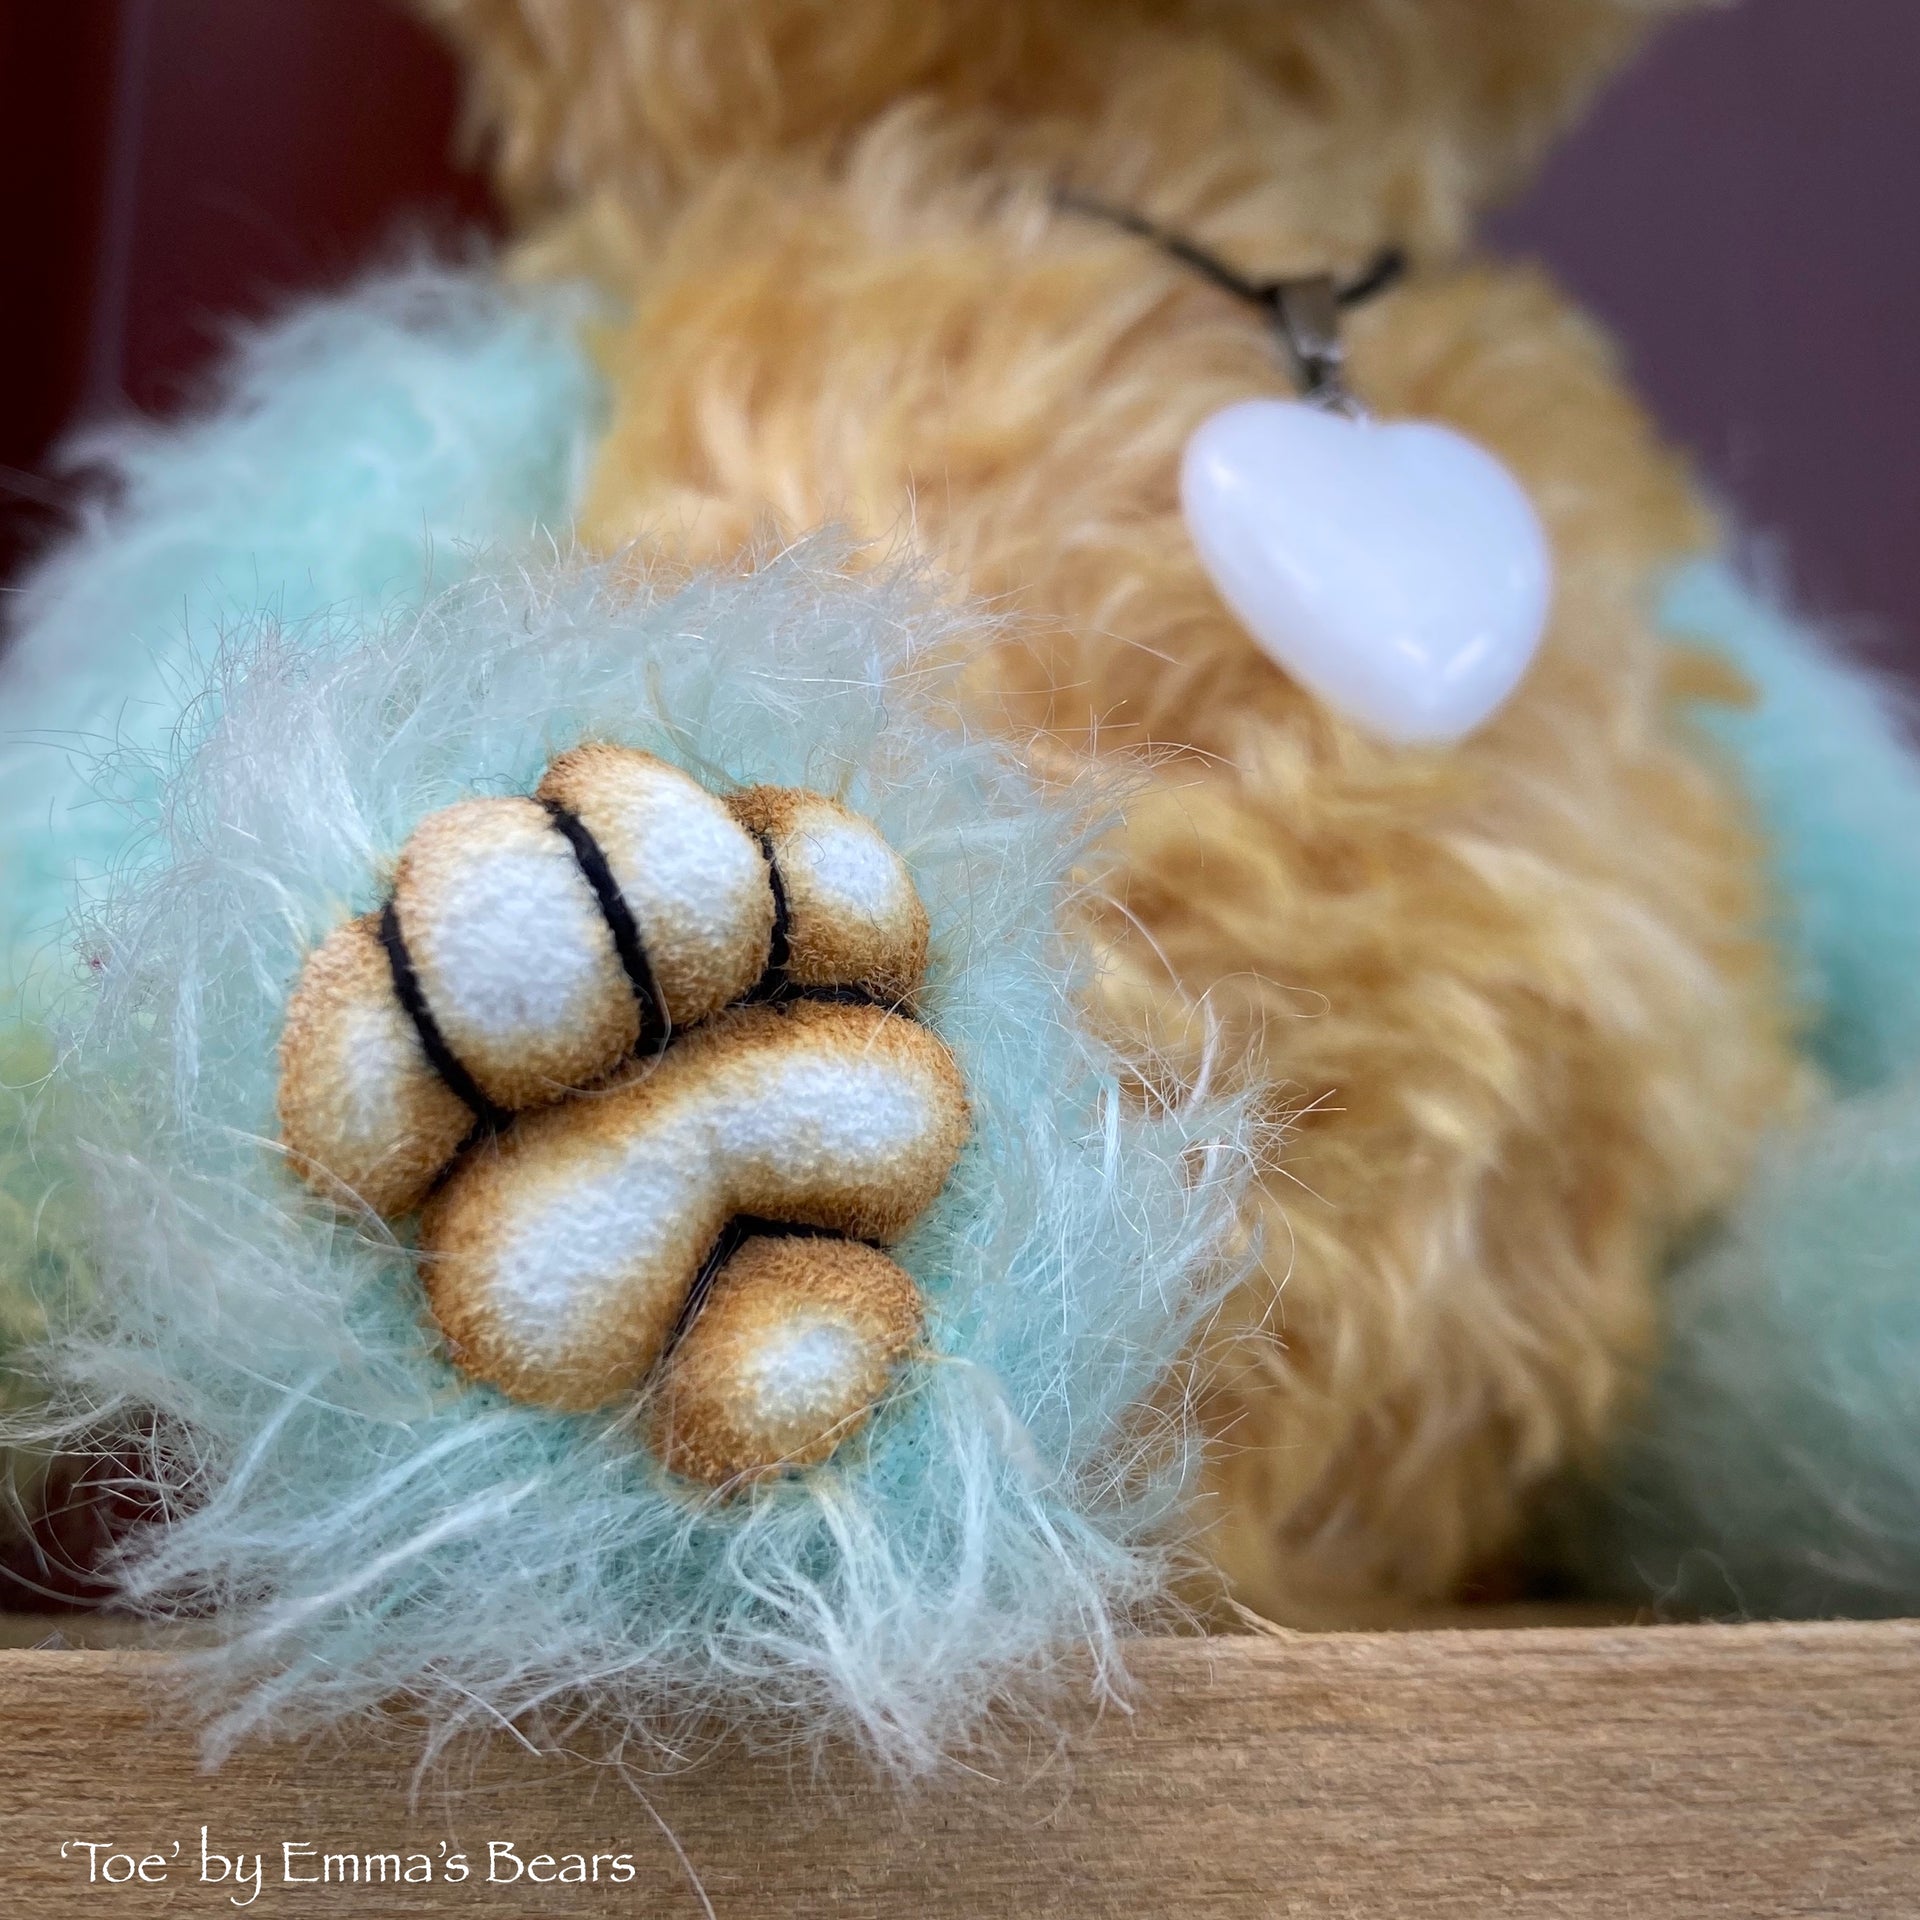 Toe - 8" Hand-Dyed Mohair and Alpaca Artist Bear by Emma's Bears - OOAK in a Limited Series